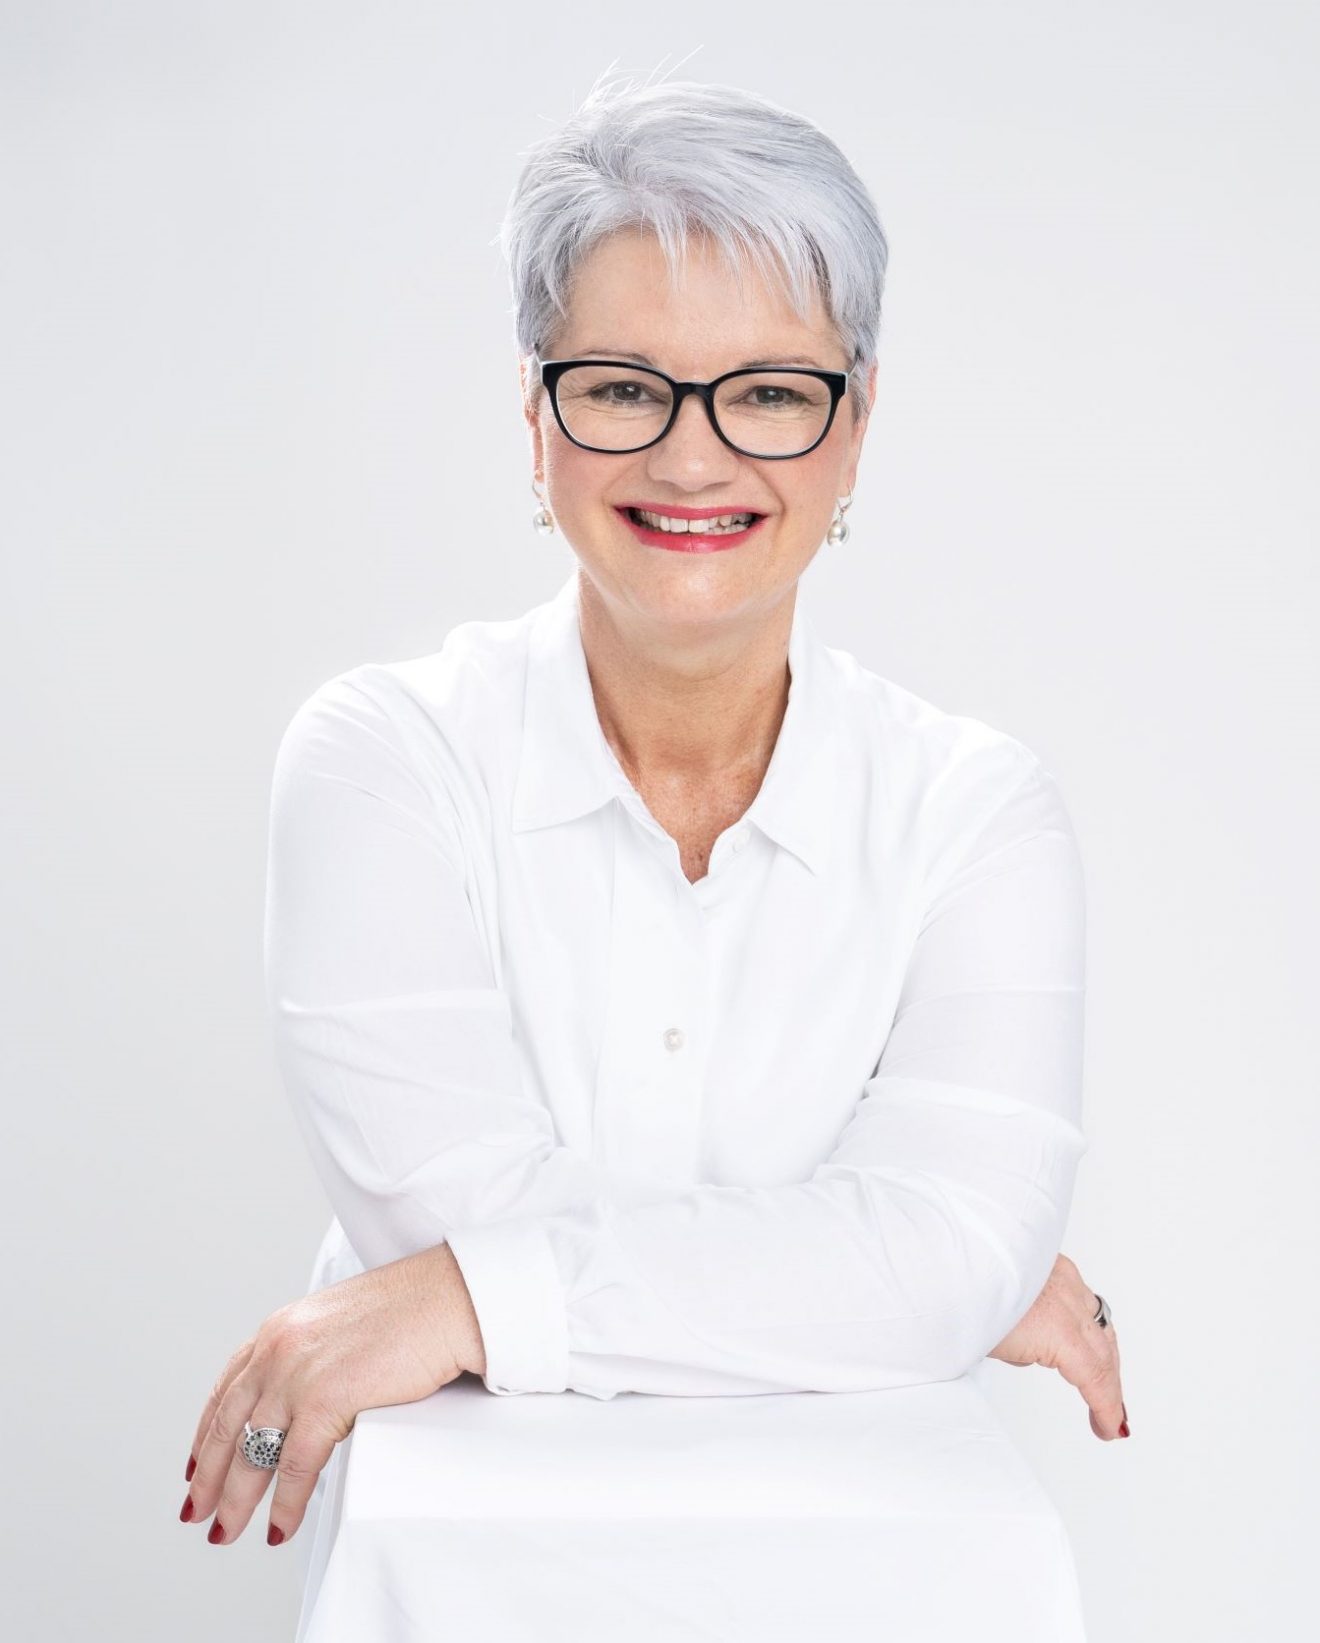 Photo of Deb Bailey, a smiling, silver-haired woman with glasses, wearing a white shirt and leaning forward on a white box in a relaxed posed